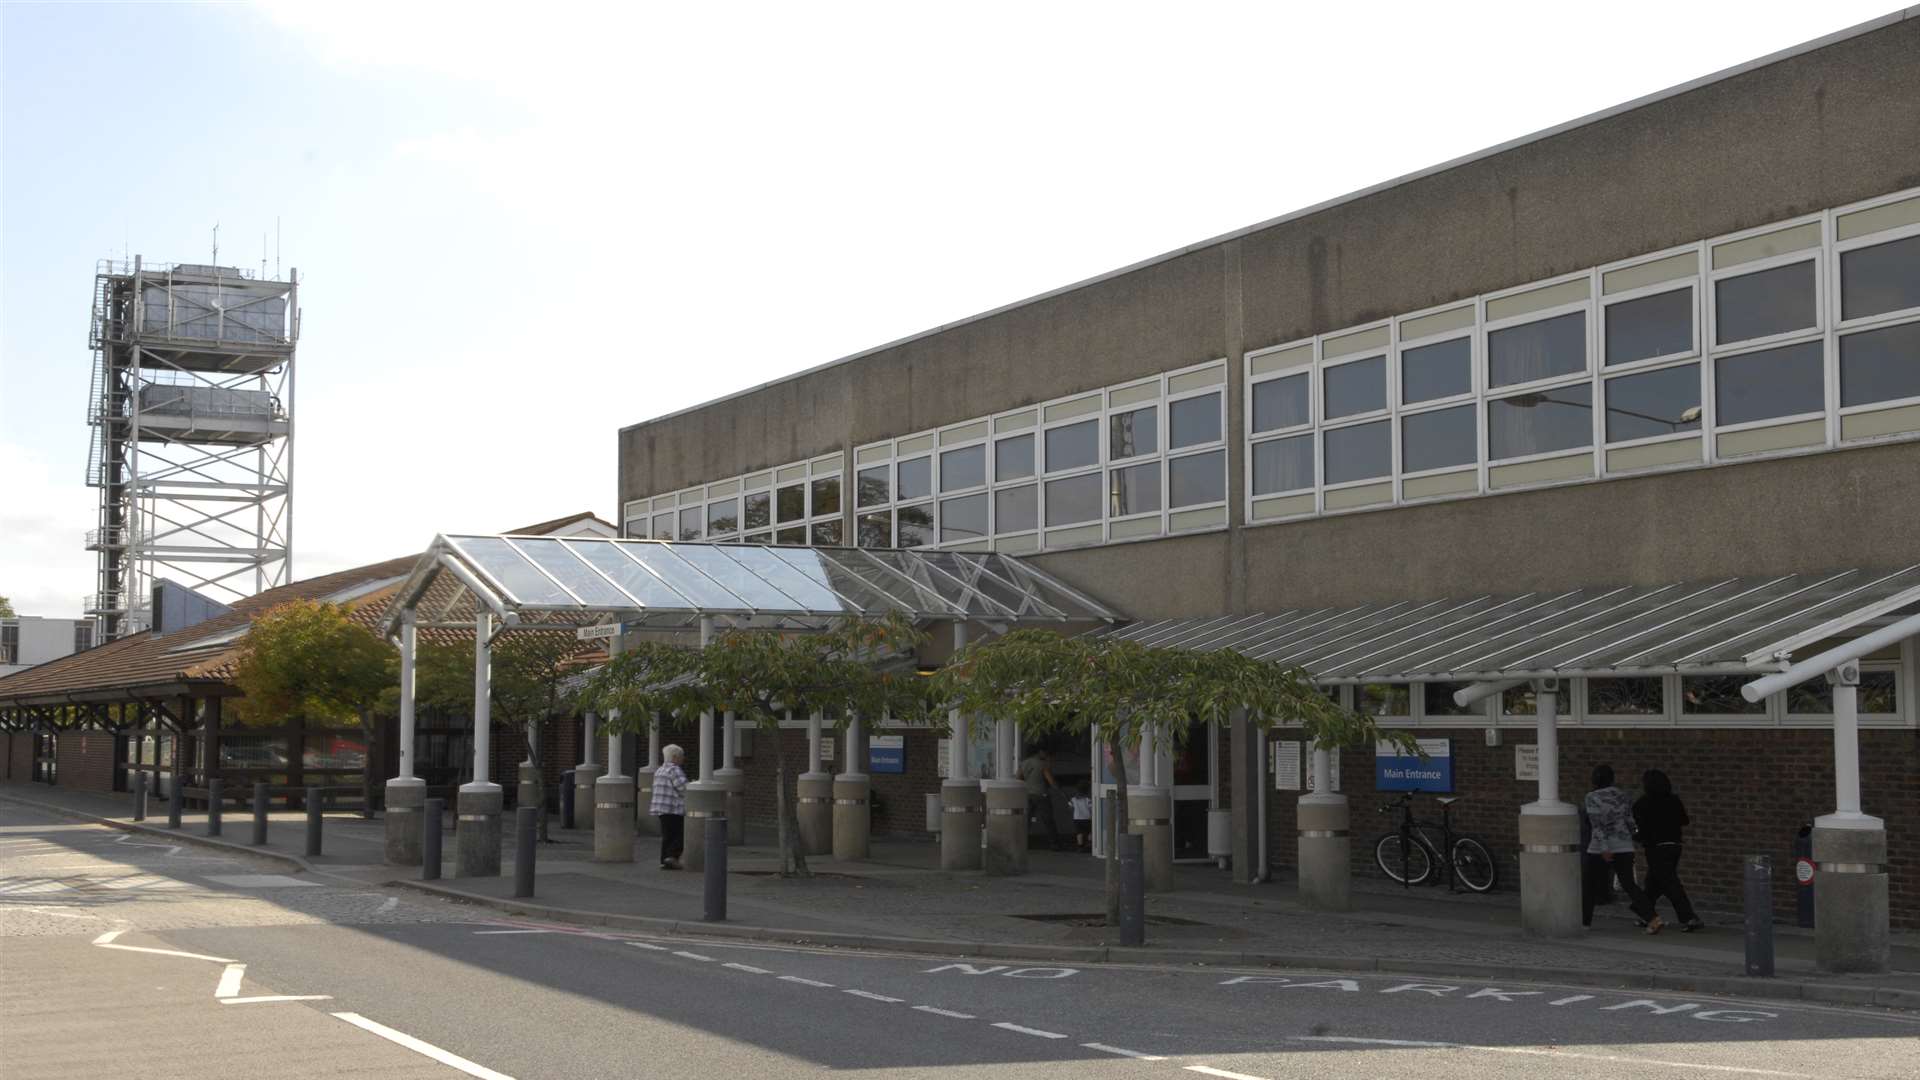 The William Harvey Hospital Ashford is currently the main focus for A&E care, along with the QEQM in Margate.